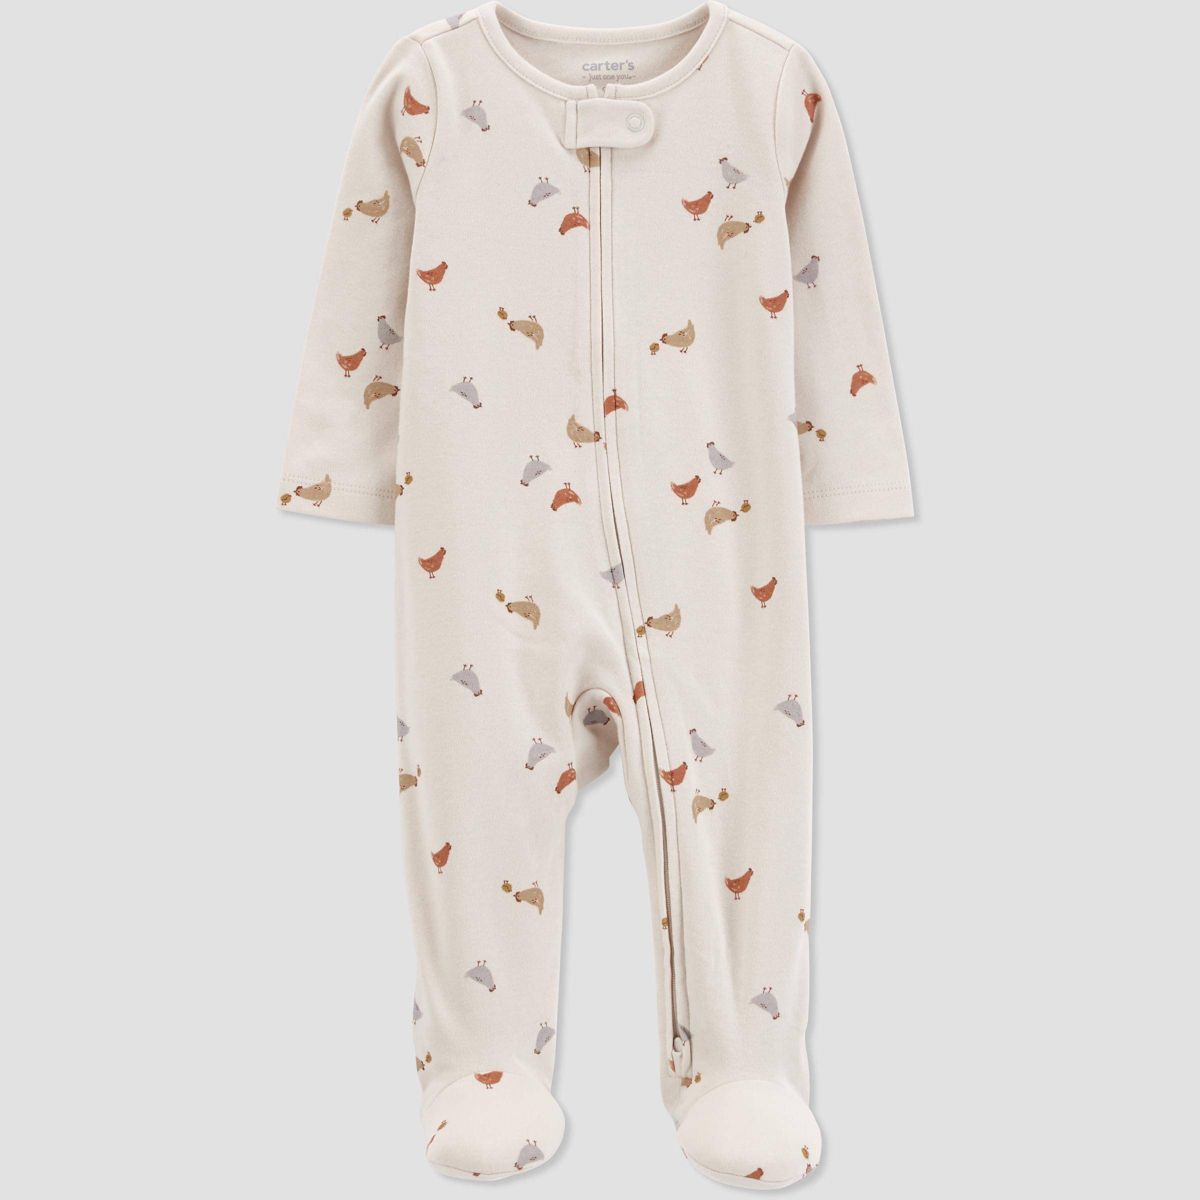 Carter's Just One You®️ Baby Bird Footed Pajama - Brown/Gray | Target